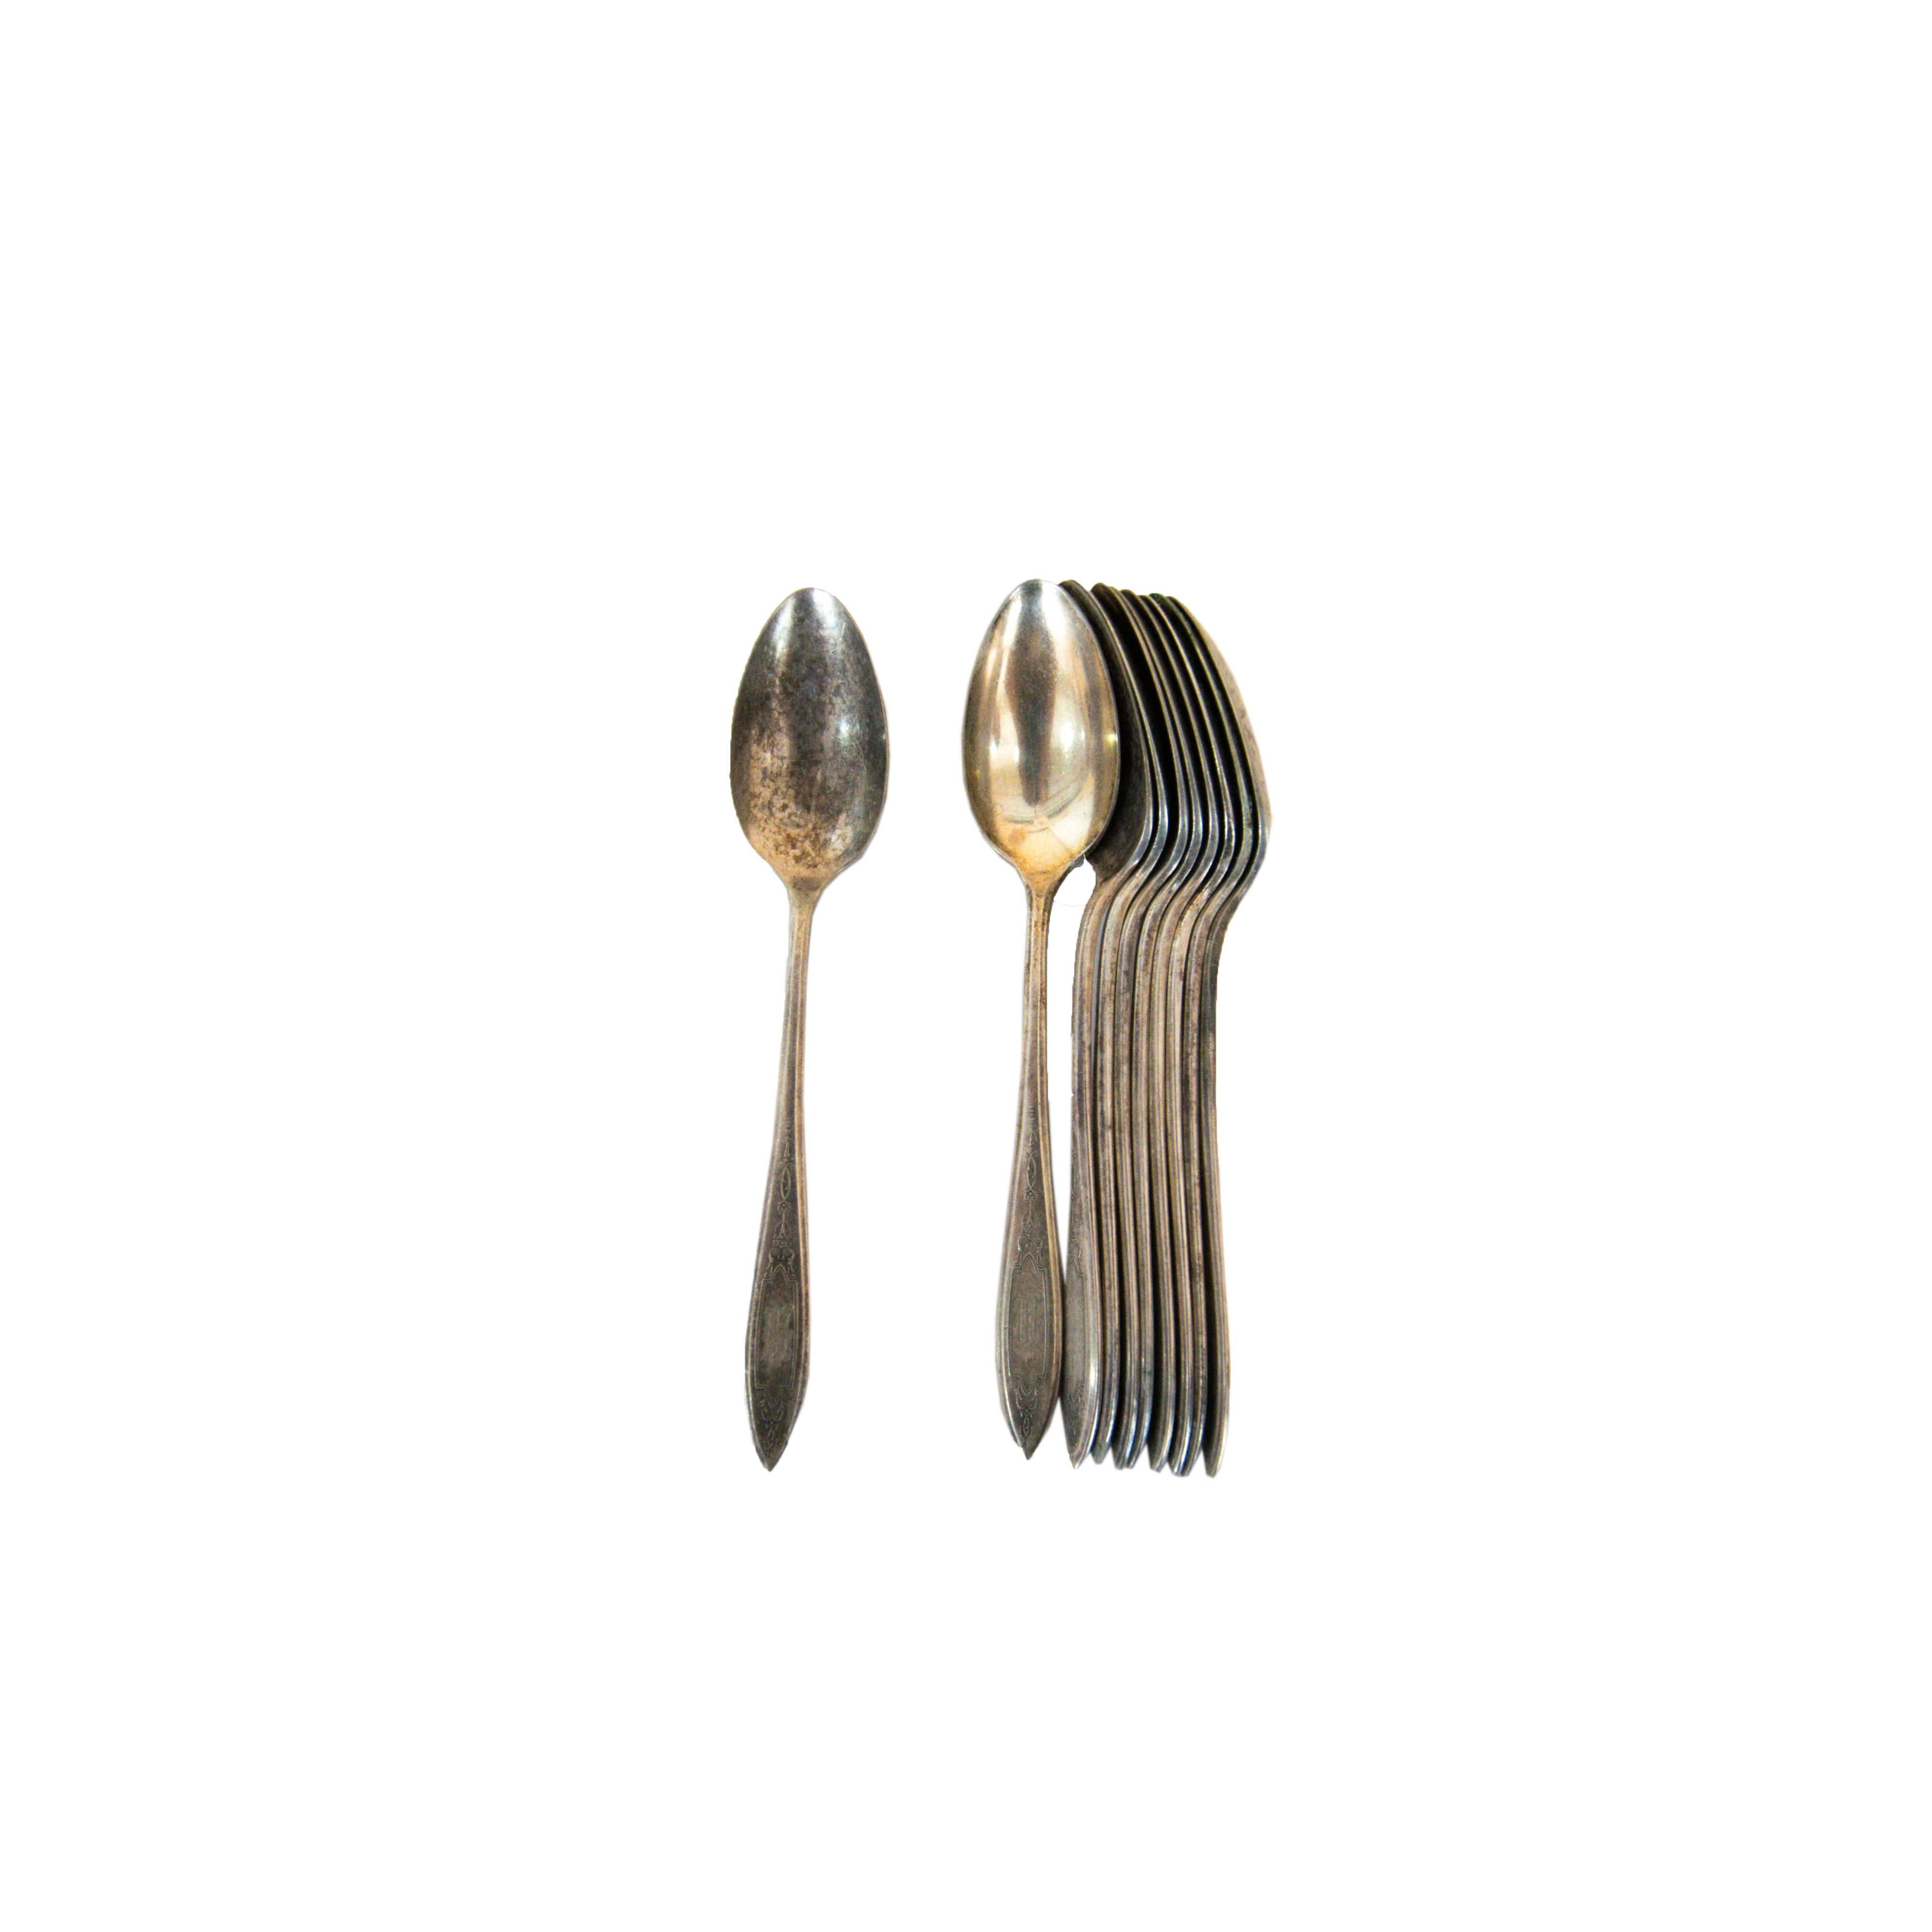 Jugendstil Antique Silver Cutlery with Stunning Embossed Patterns from WMA Rogers Sectional For Sale